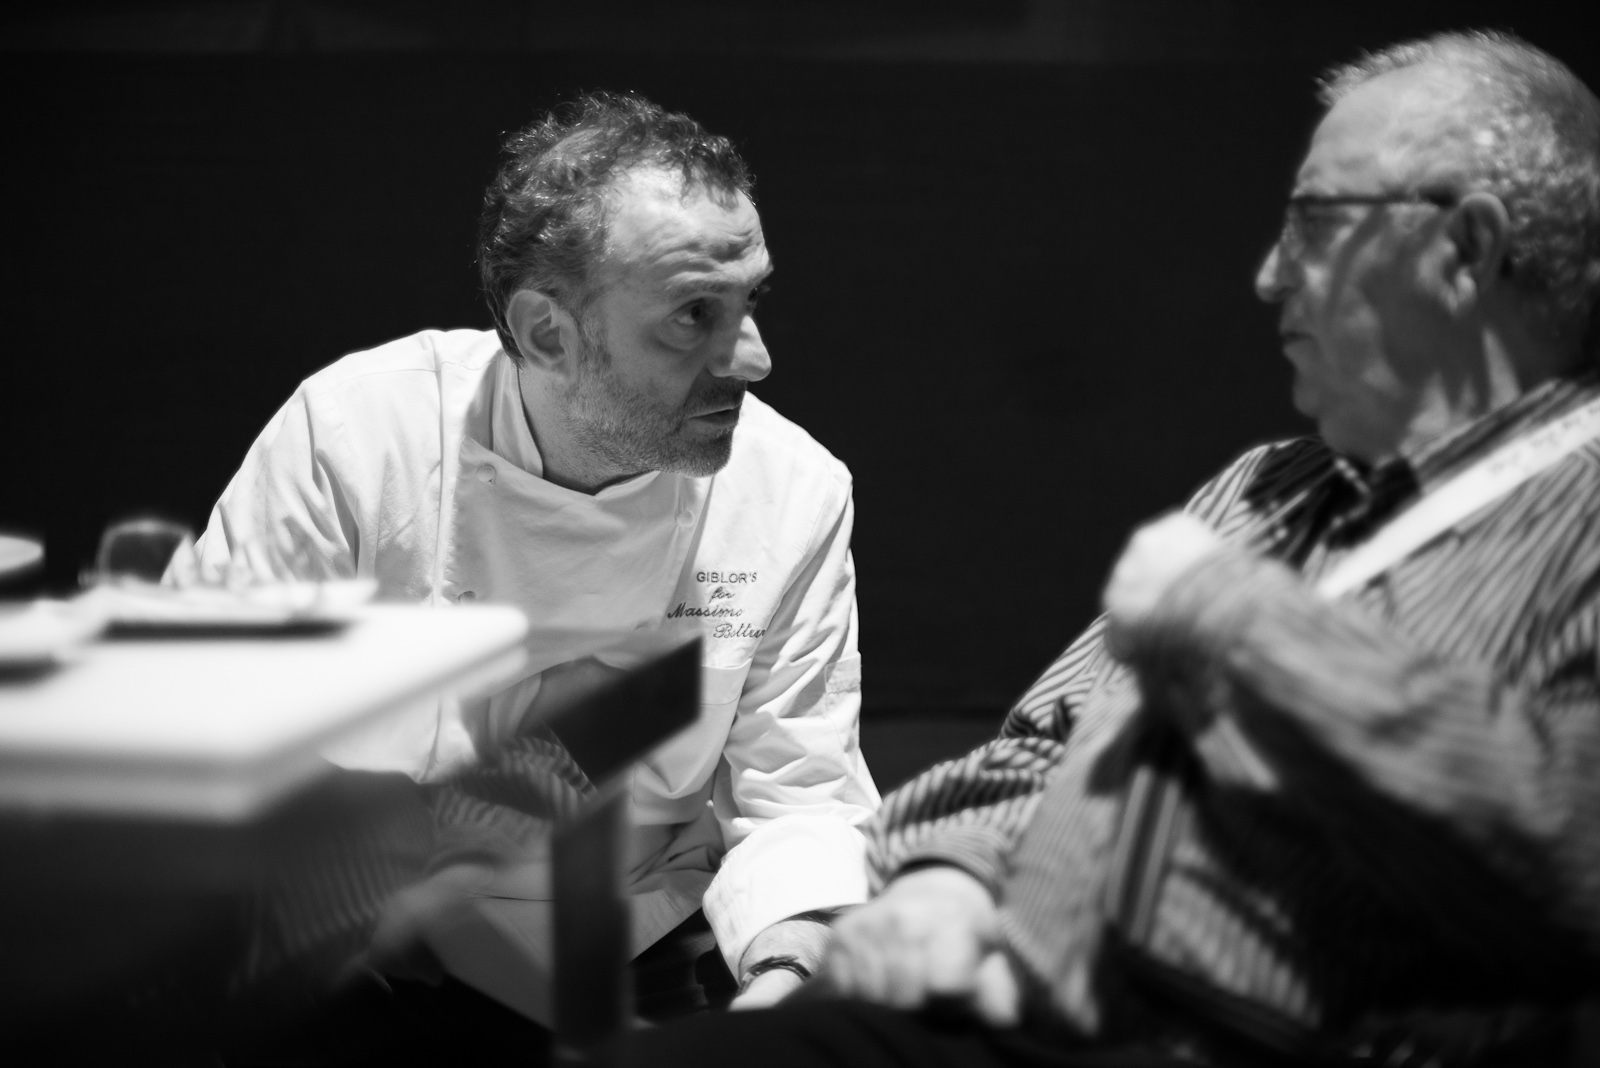 Chefs Massimo Bottura and Juan Mari Arzak discussing the role of